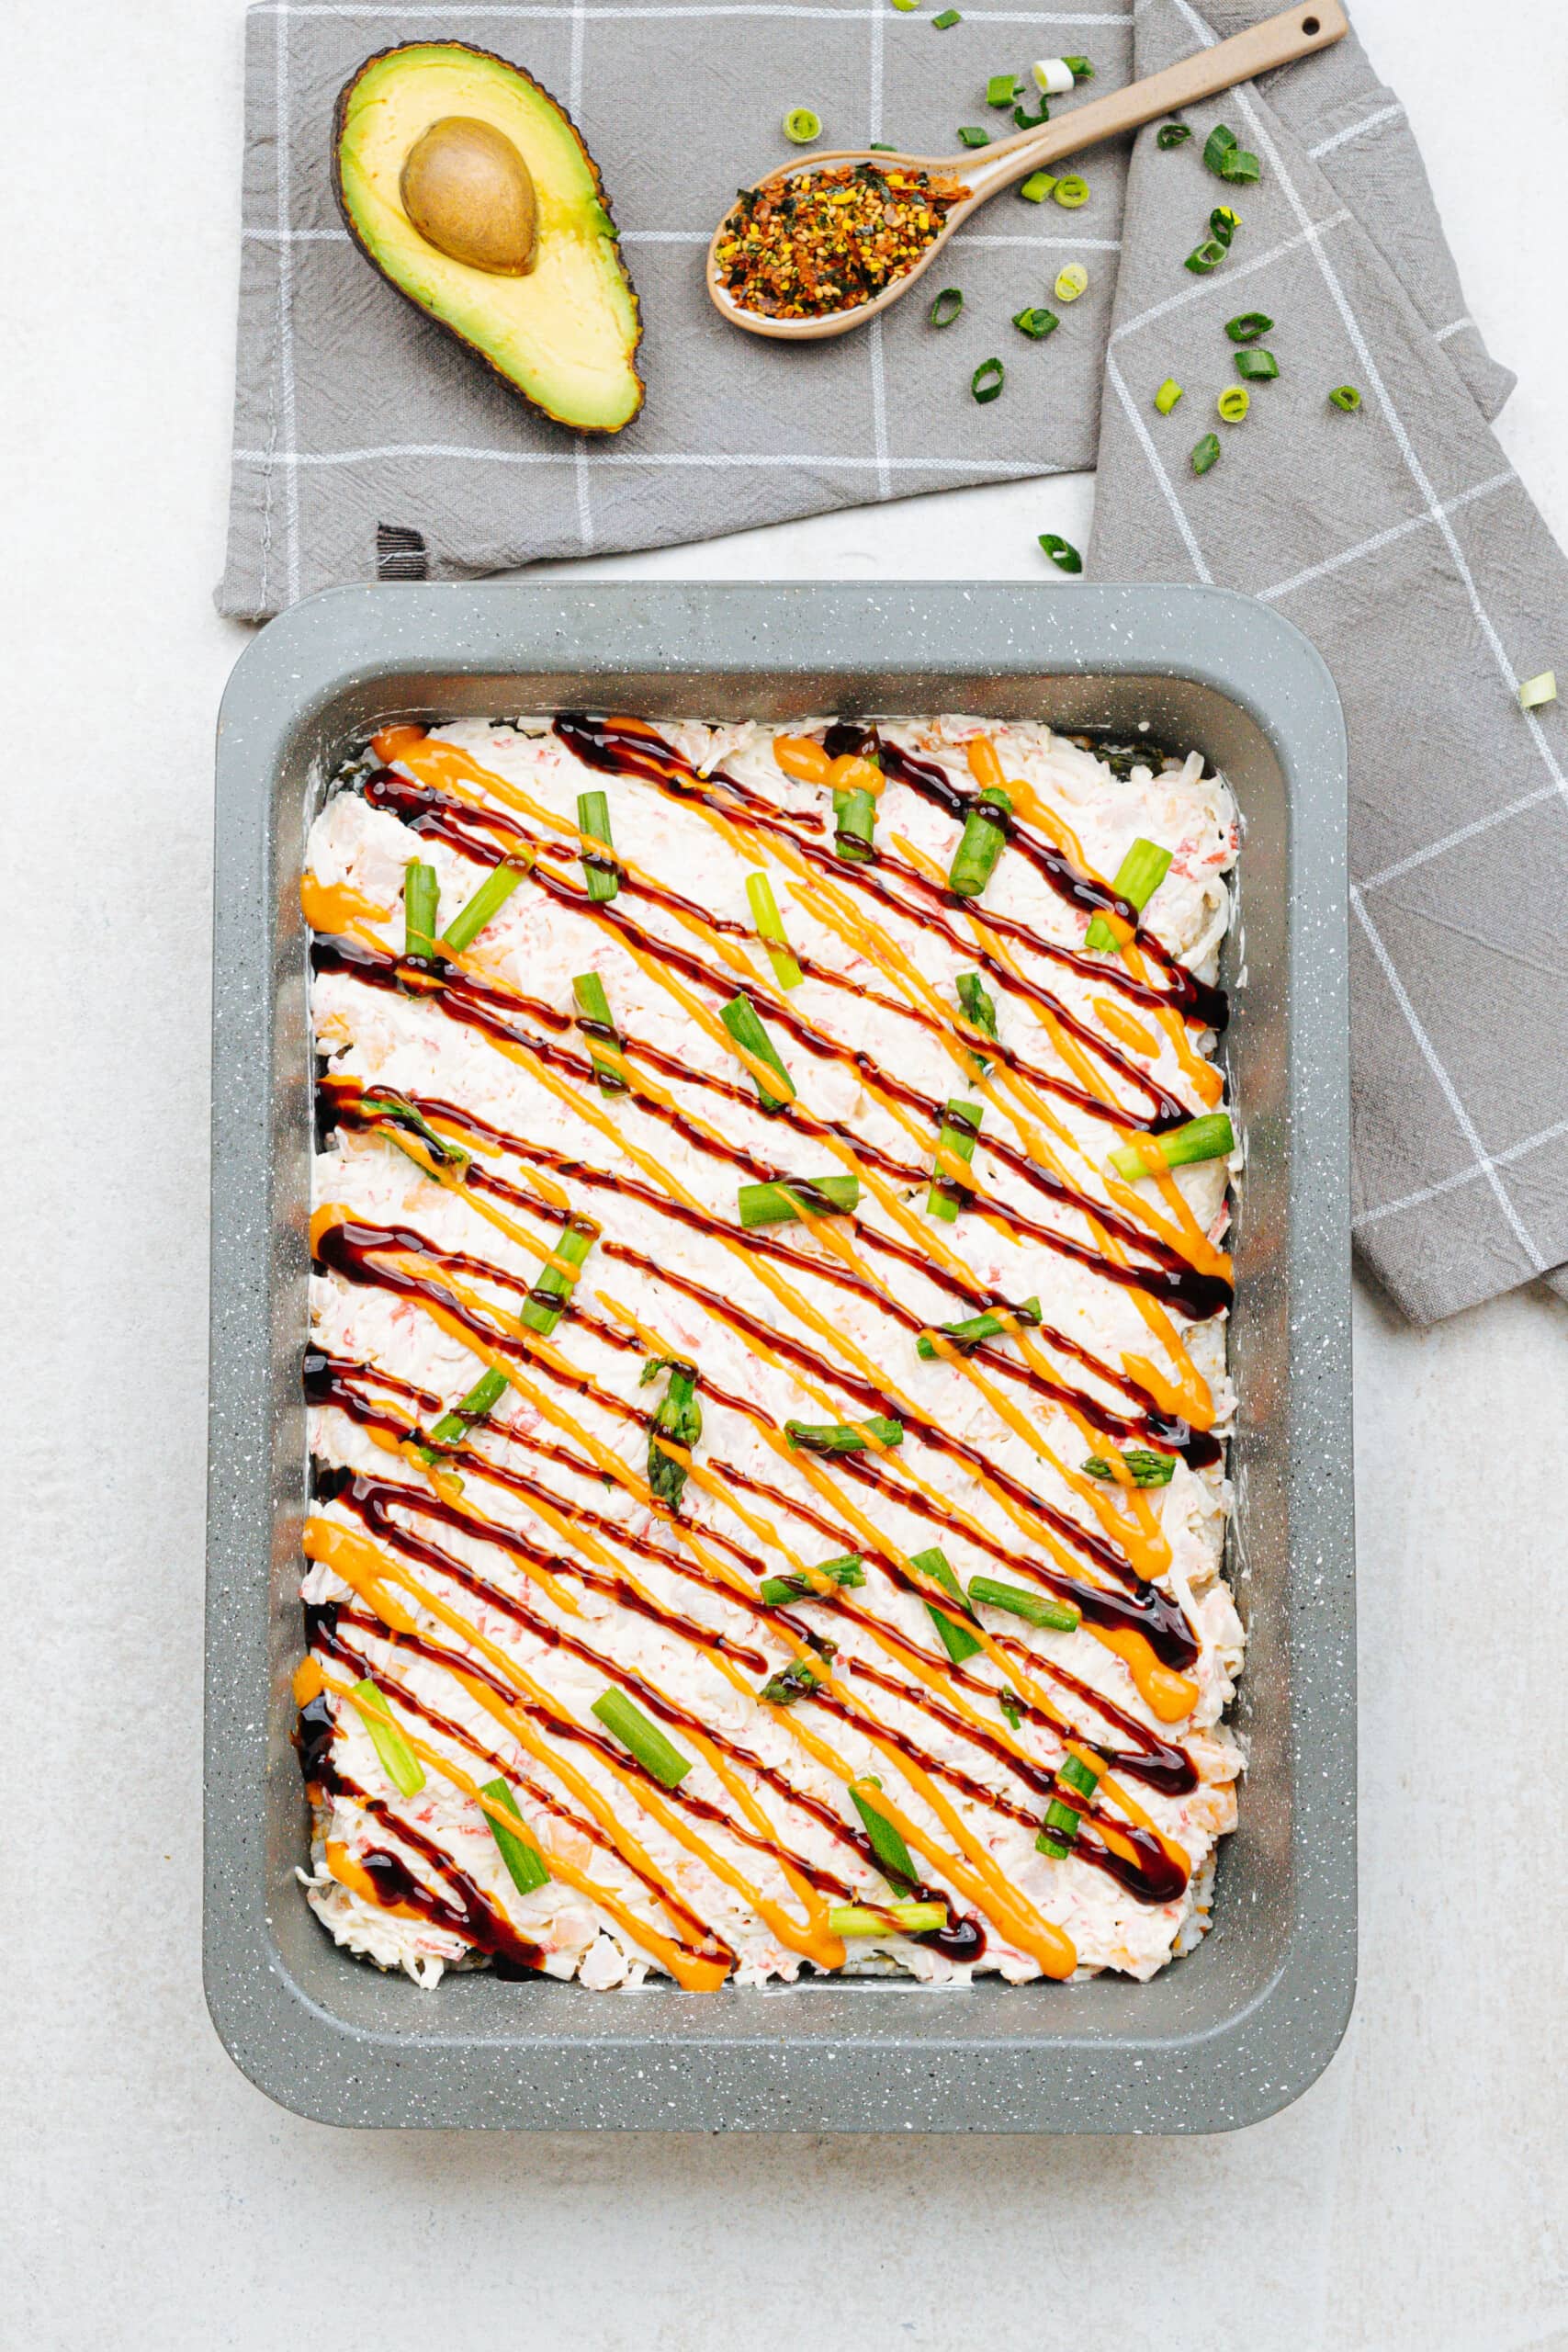 Sirracha sauce drizzled diagonally over the sushi casserole